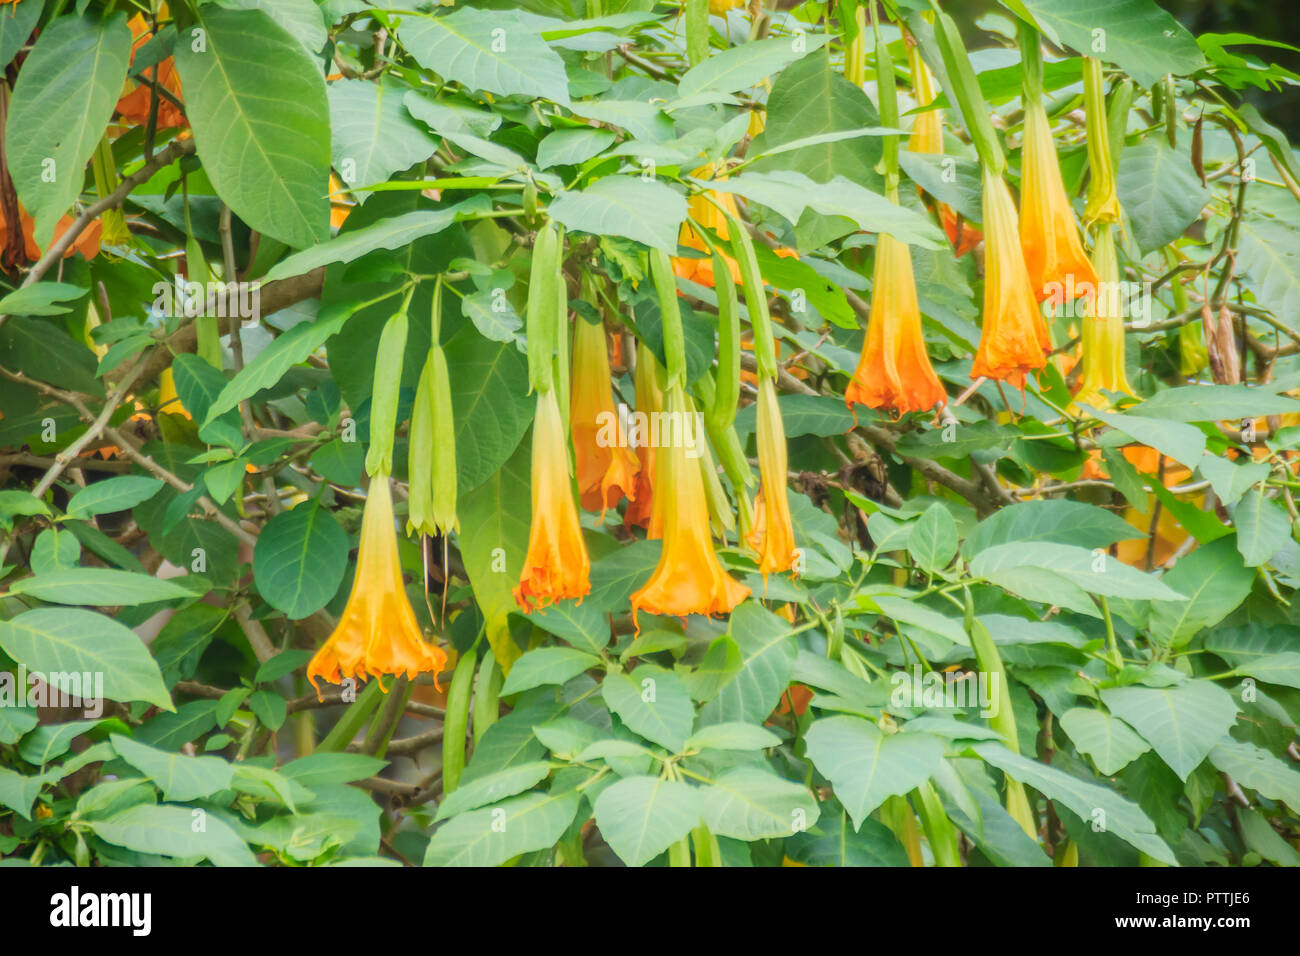 Yellow angel's trumpet flowers (Brugmansia suaveolens) on tree. Brugmansia suaveolens also known as angel trumpet, or angel's tears, is a South Americ Stock Photo